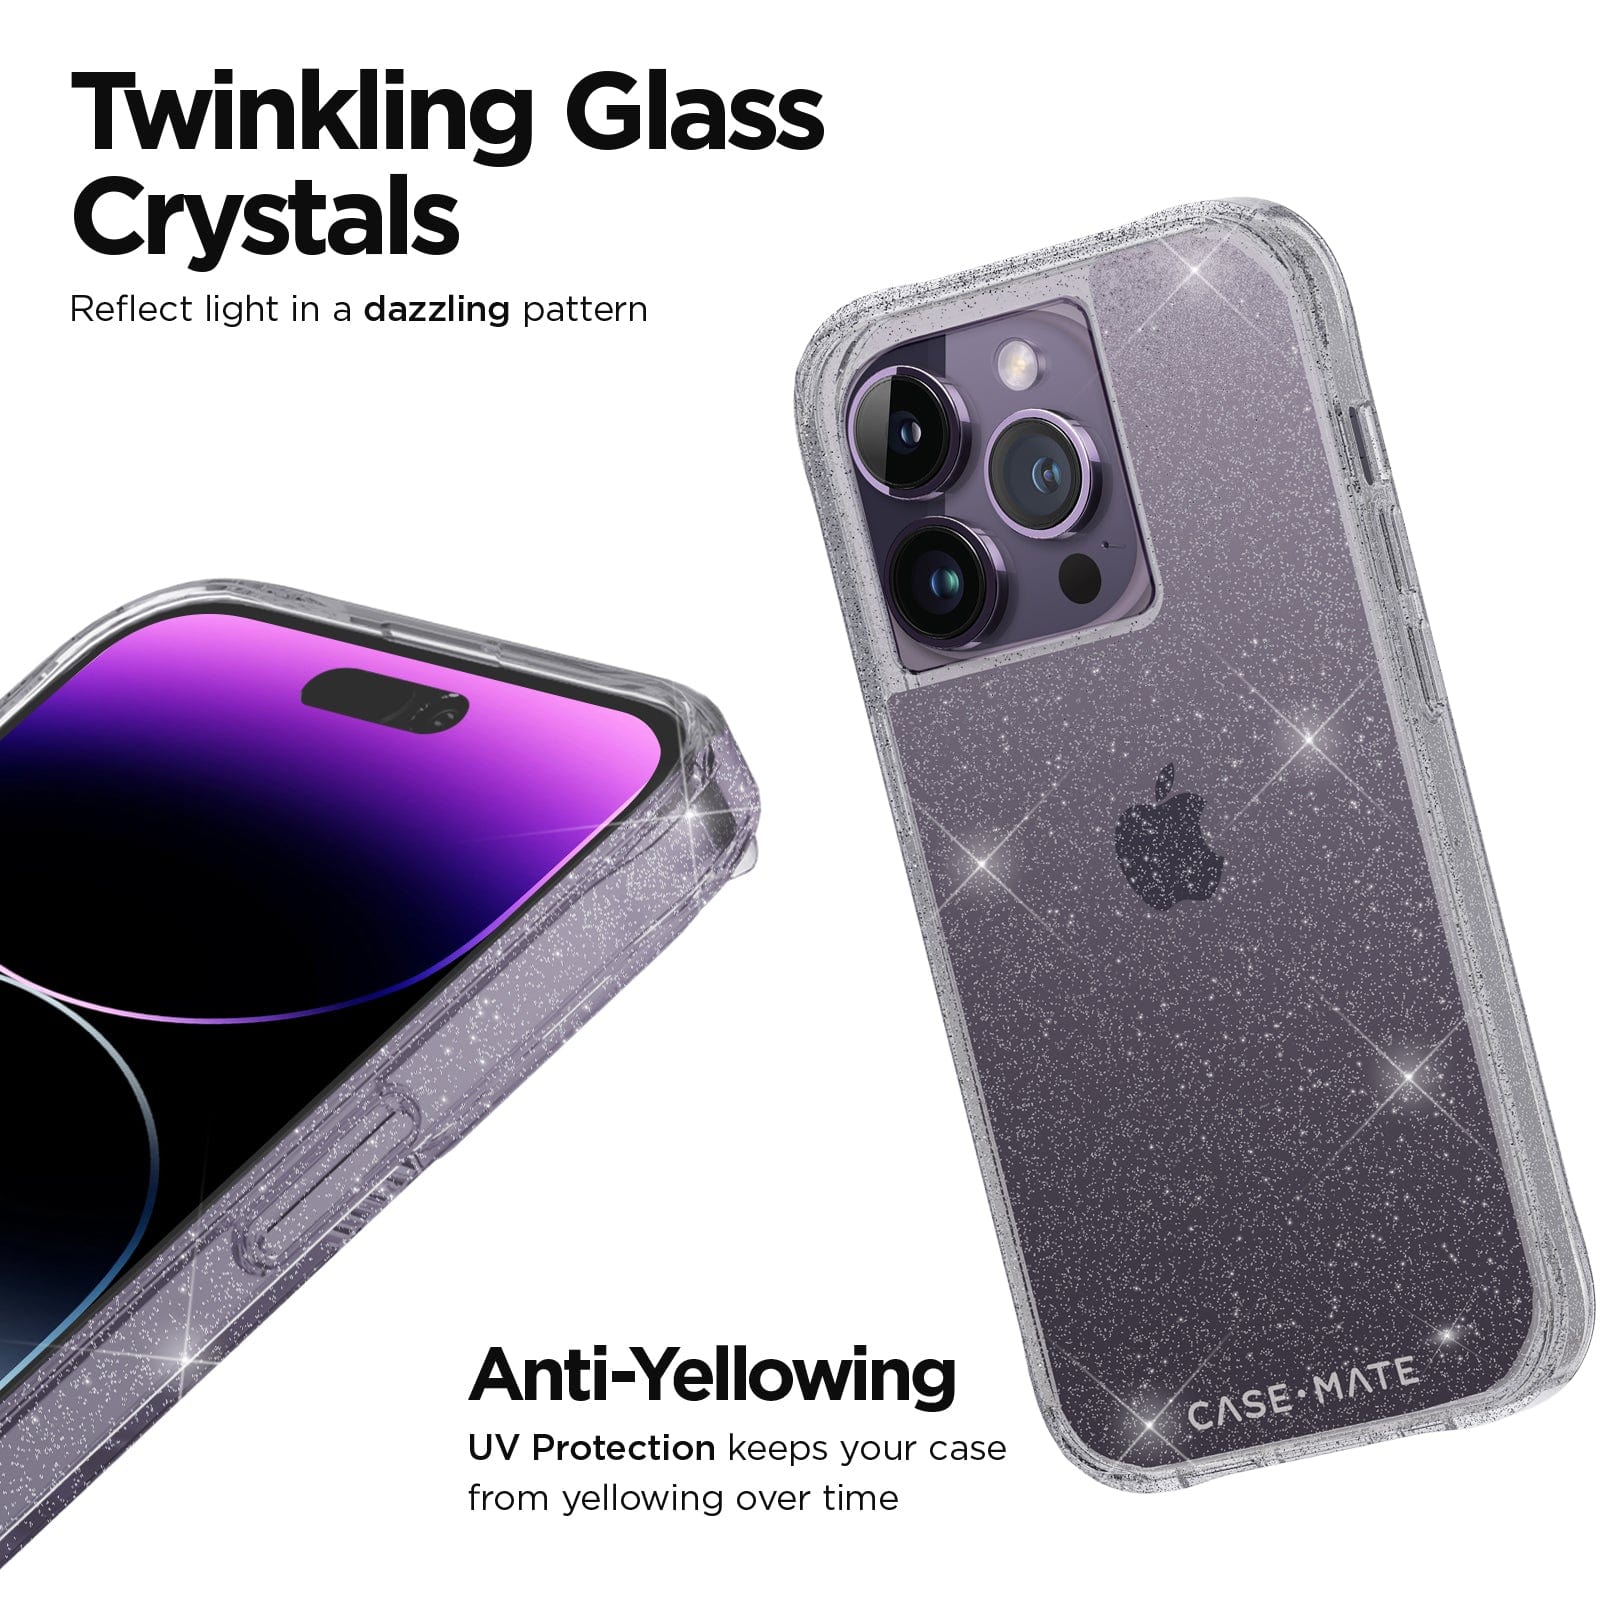 TWINKLING GLASS CRYSTALS. REFLECT IN A DAZZLING PATTERN. ANTI-YELLOWING UV PROTECTION KEEPS YOUR CASE FROM YELLOWING OVER TIME.